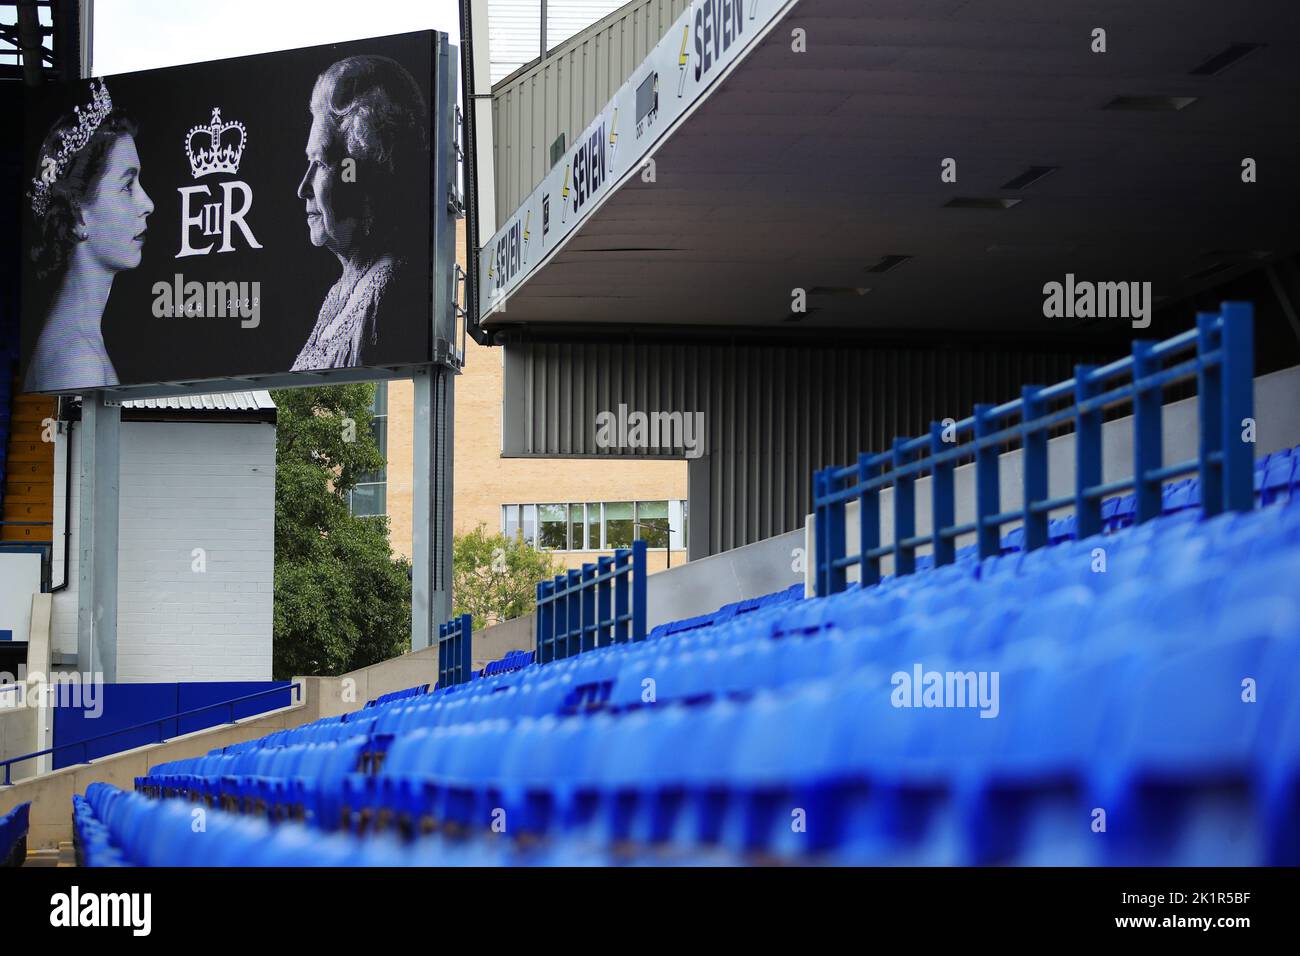 A tribute to Queen Elizabeth II is seen ahead of the match - Ipswich Town v Bristol Rovers, Sky Bet League One, Portman Road, Ipswich, UK - 13th September 2022  Editorial Use Only - DataCo restrictions apply Stock Photo